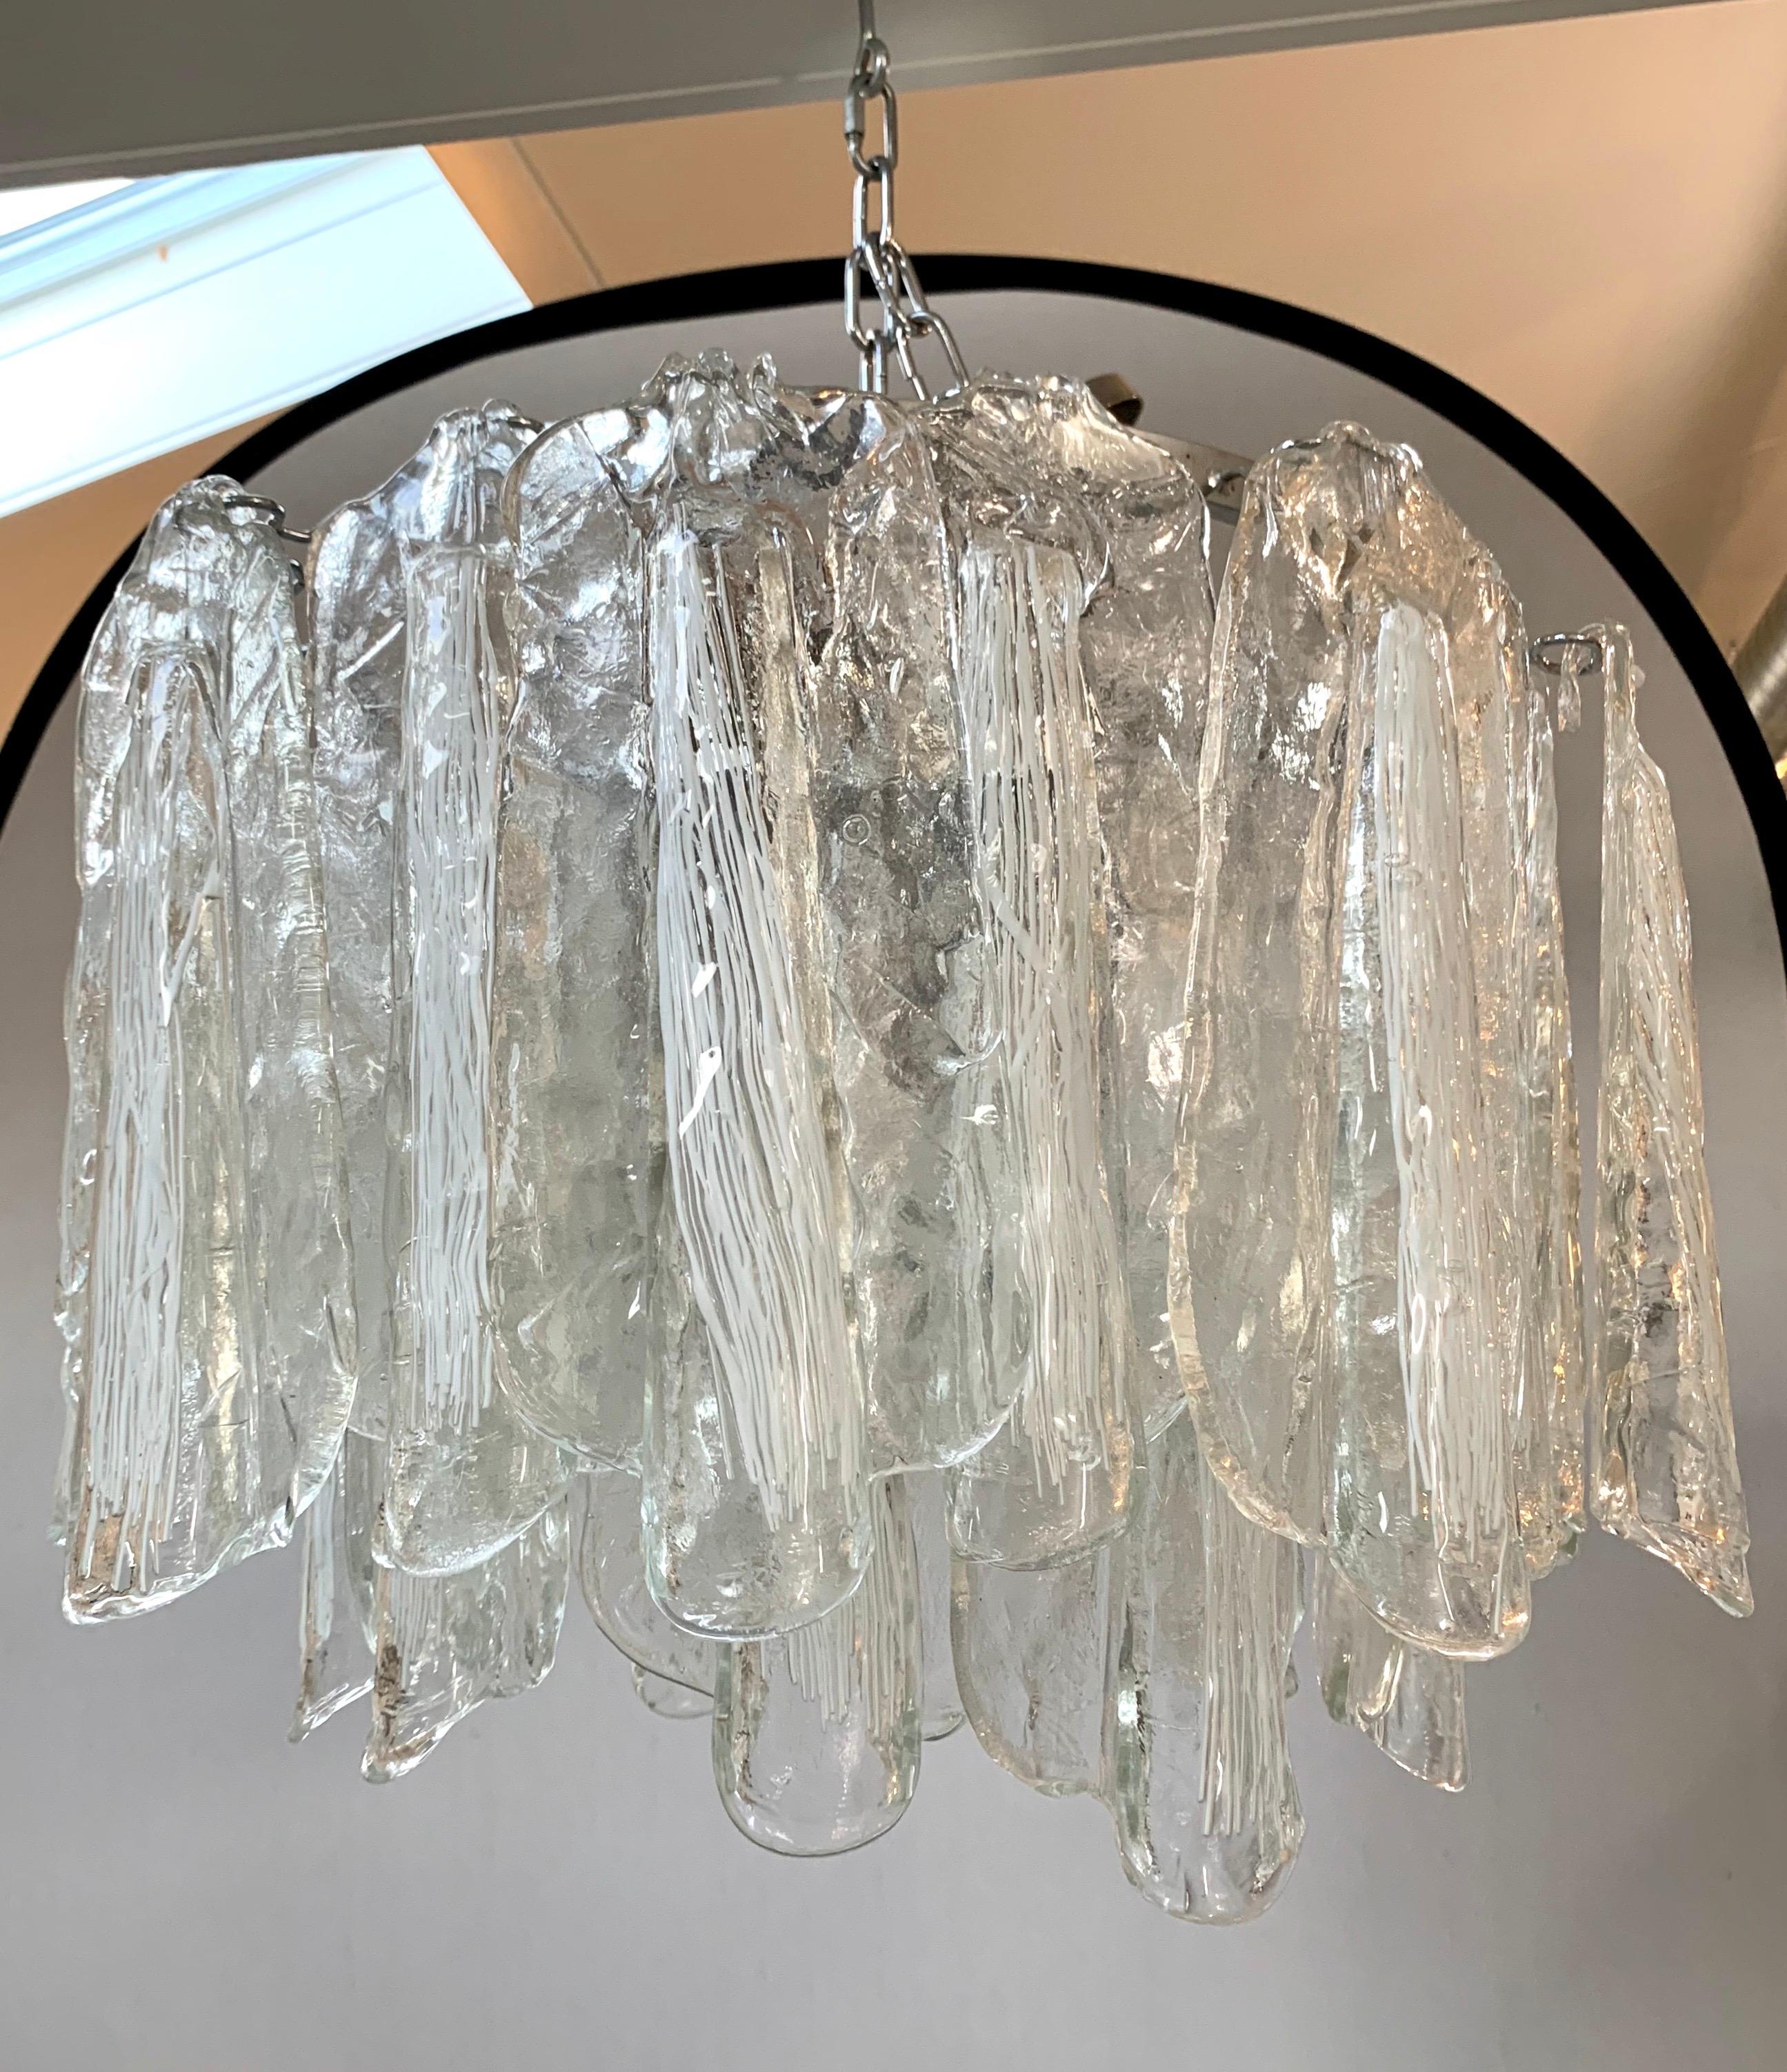 Mid-Century Modern Chandelier with Hanging Murano Glass Made in Italy In Good Condition For Sale In West Hartford, CT